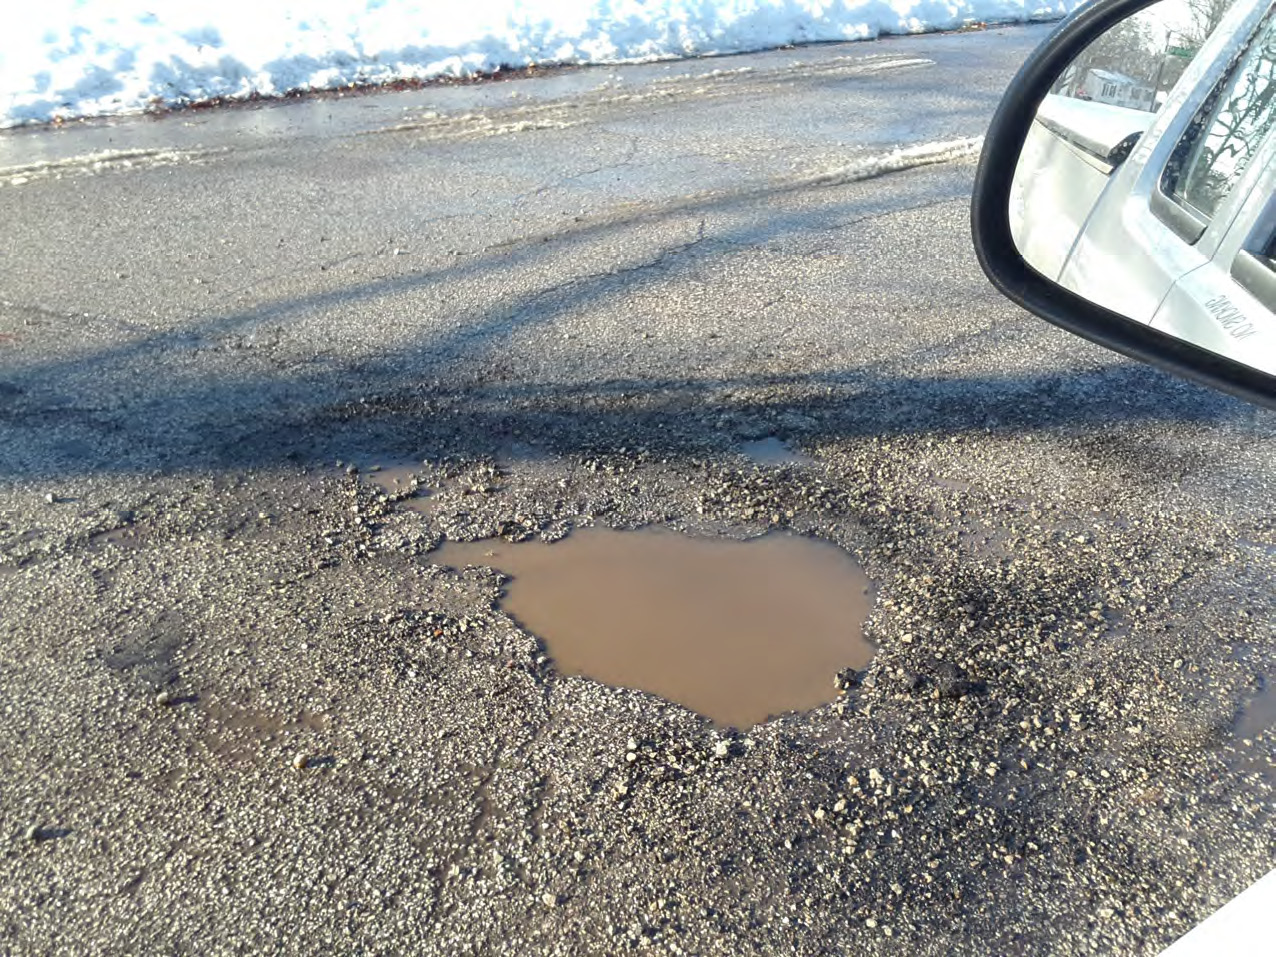 This pothole photo was collected using the iiCollector web application.